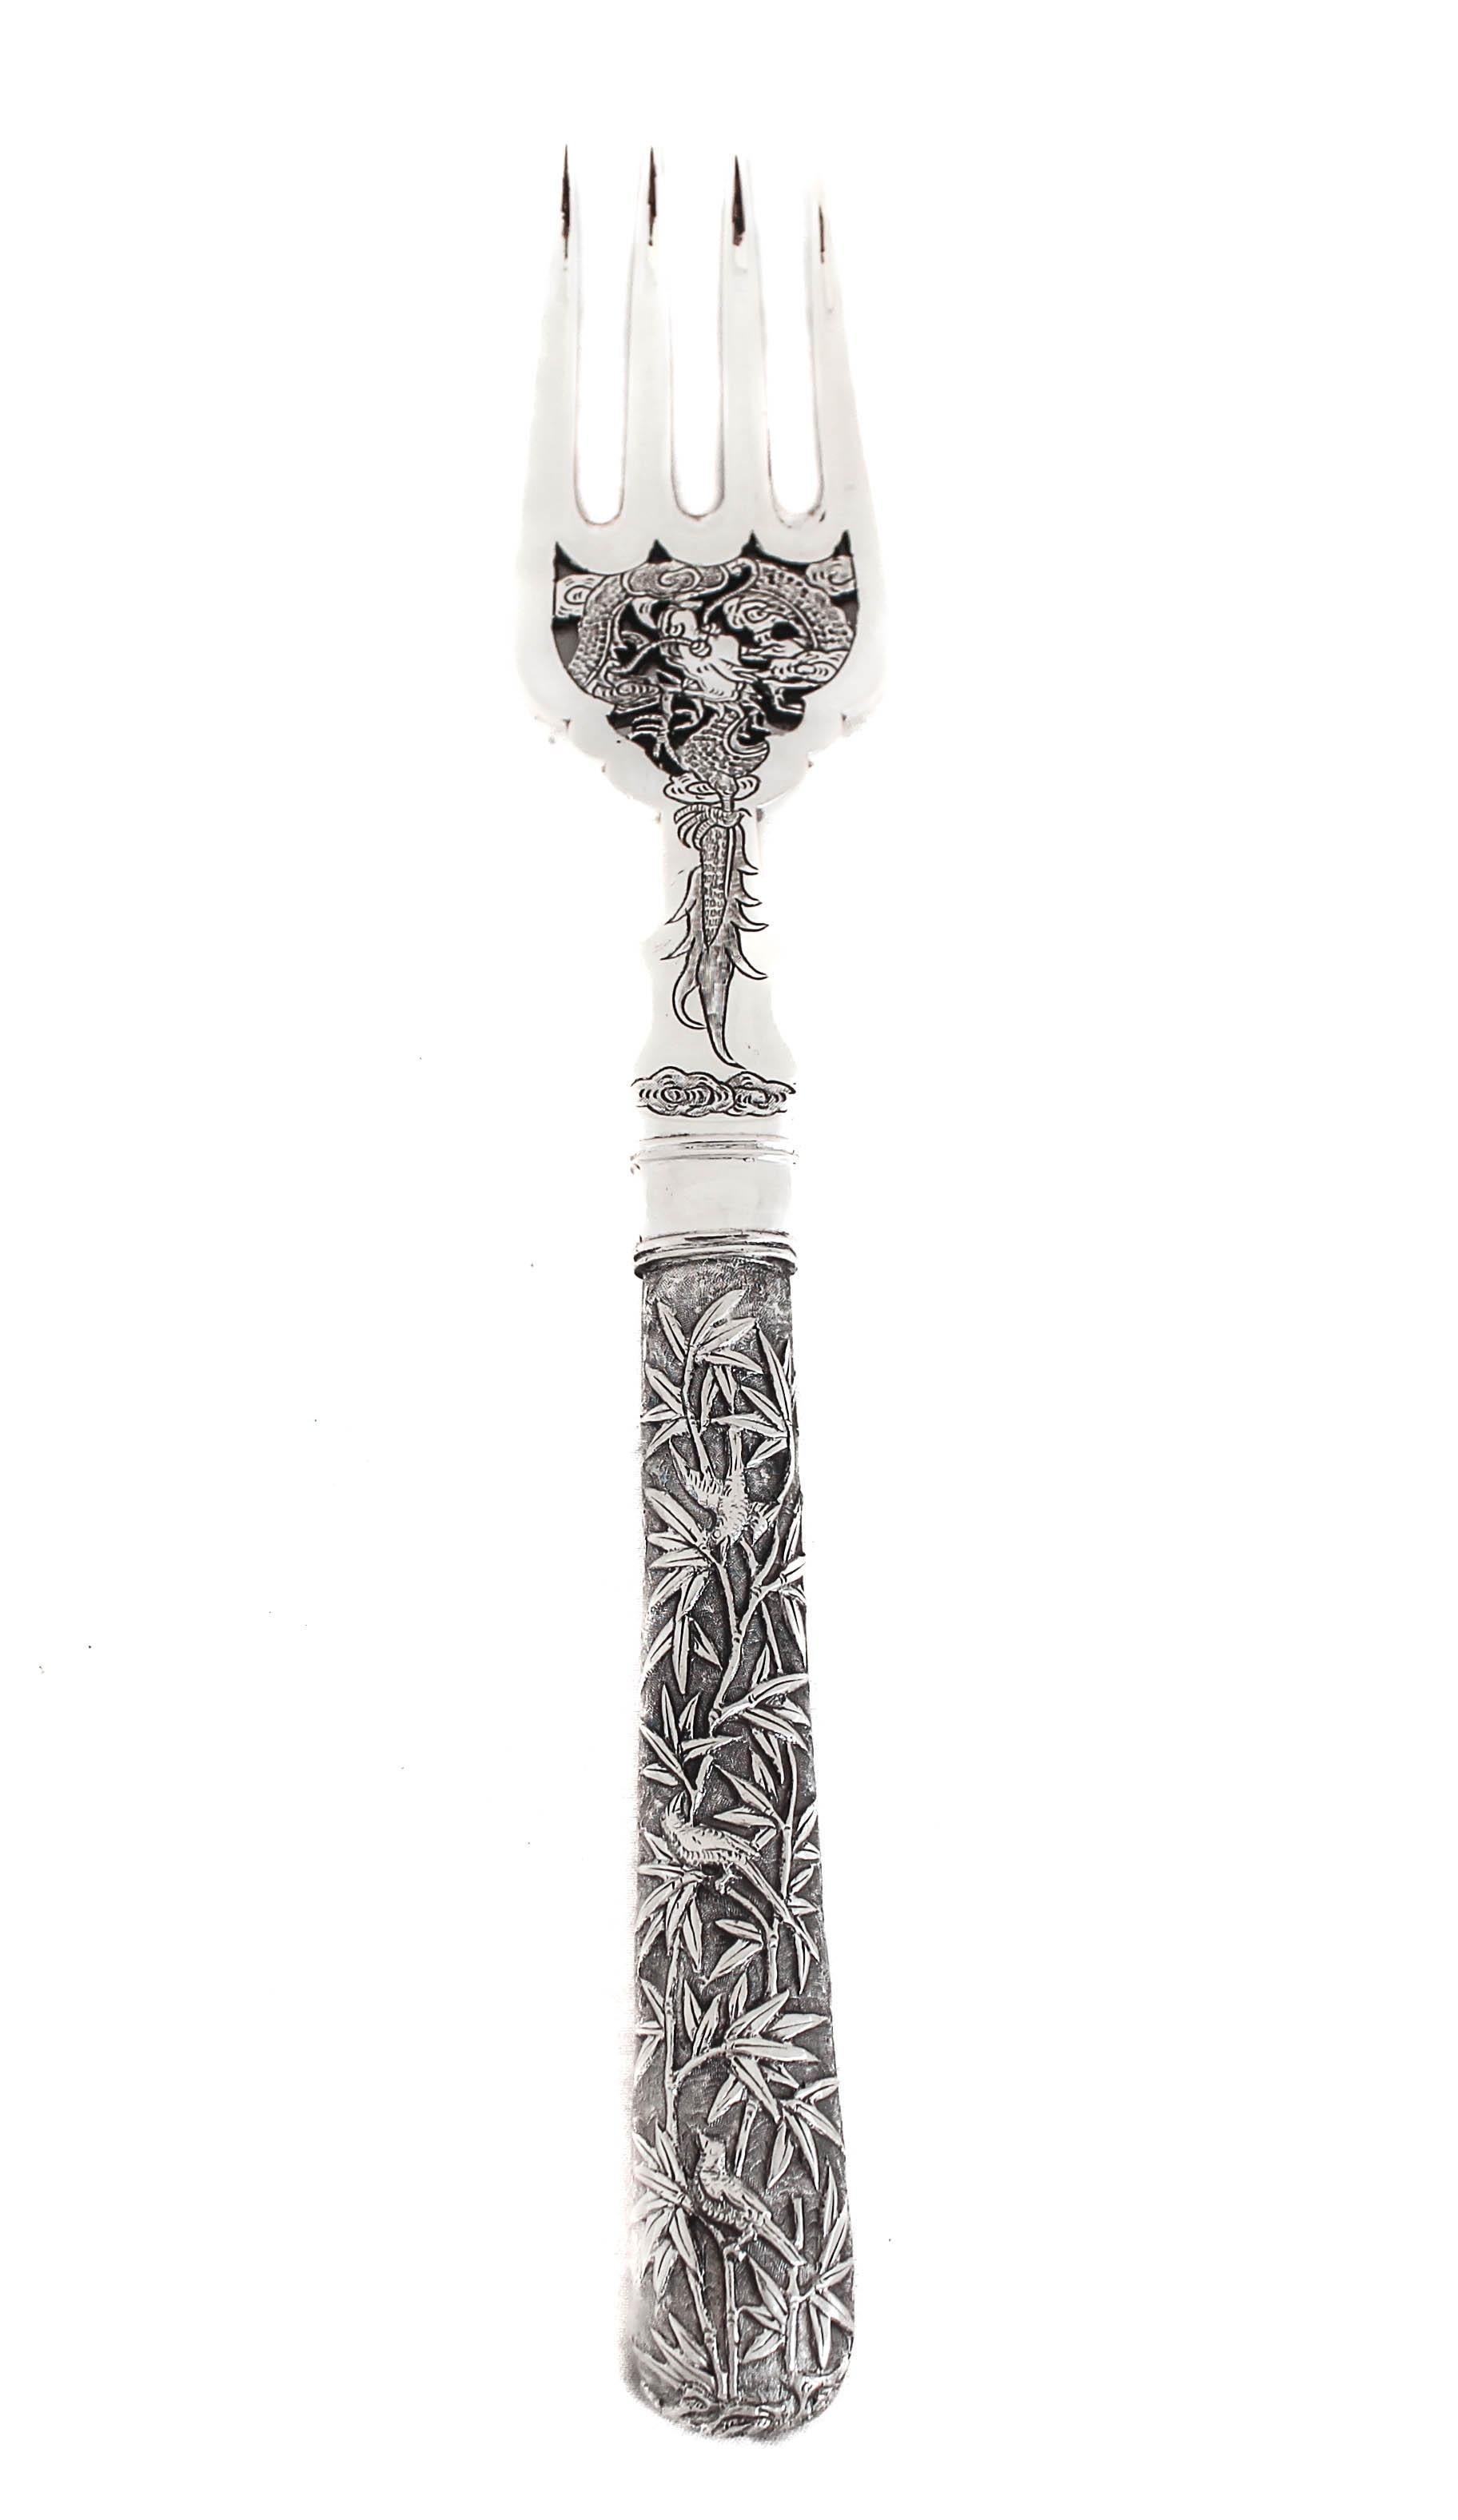 Being offered is an exquisite example of a Japanese sterling silver fish fork and server.  The handles on both pieces have a bamboo motif with birds on them.  The fork has an elaborate design between the handle and tines.  The server has a cutout